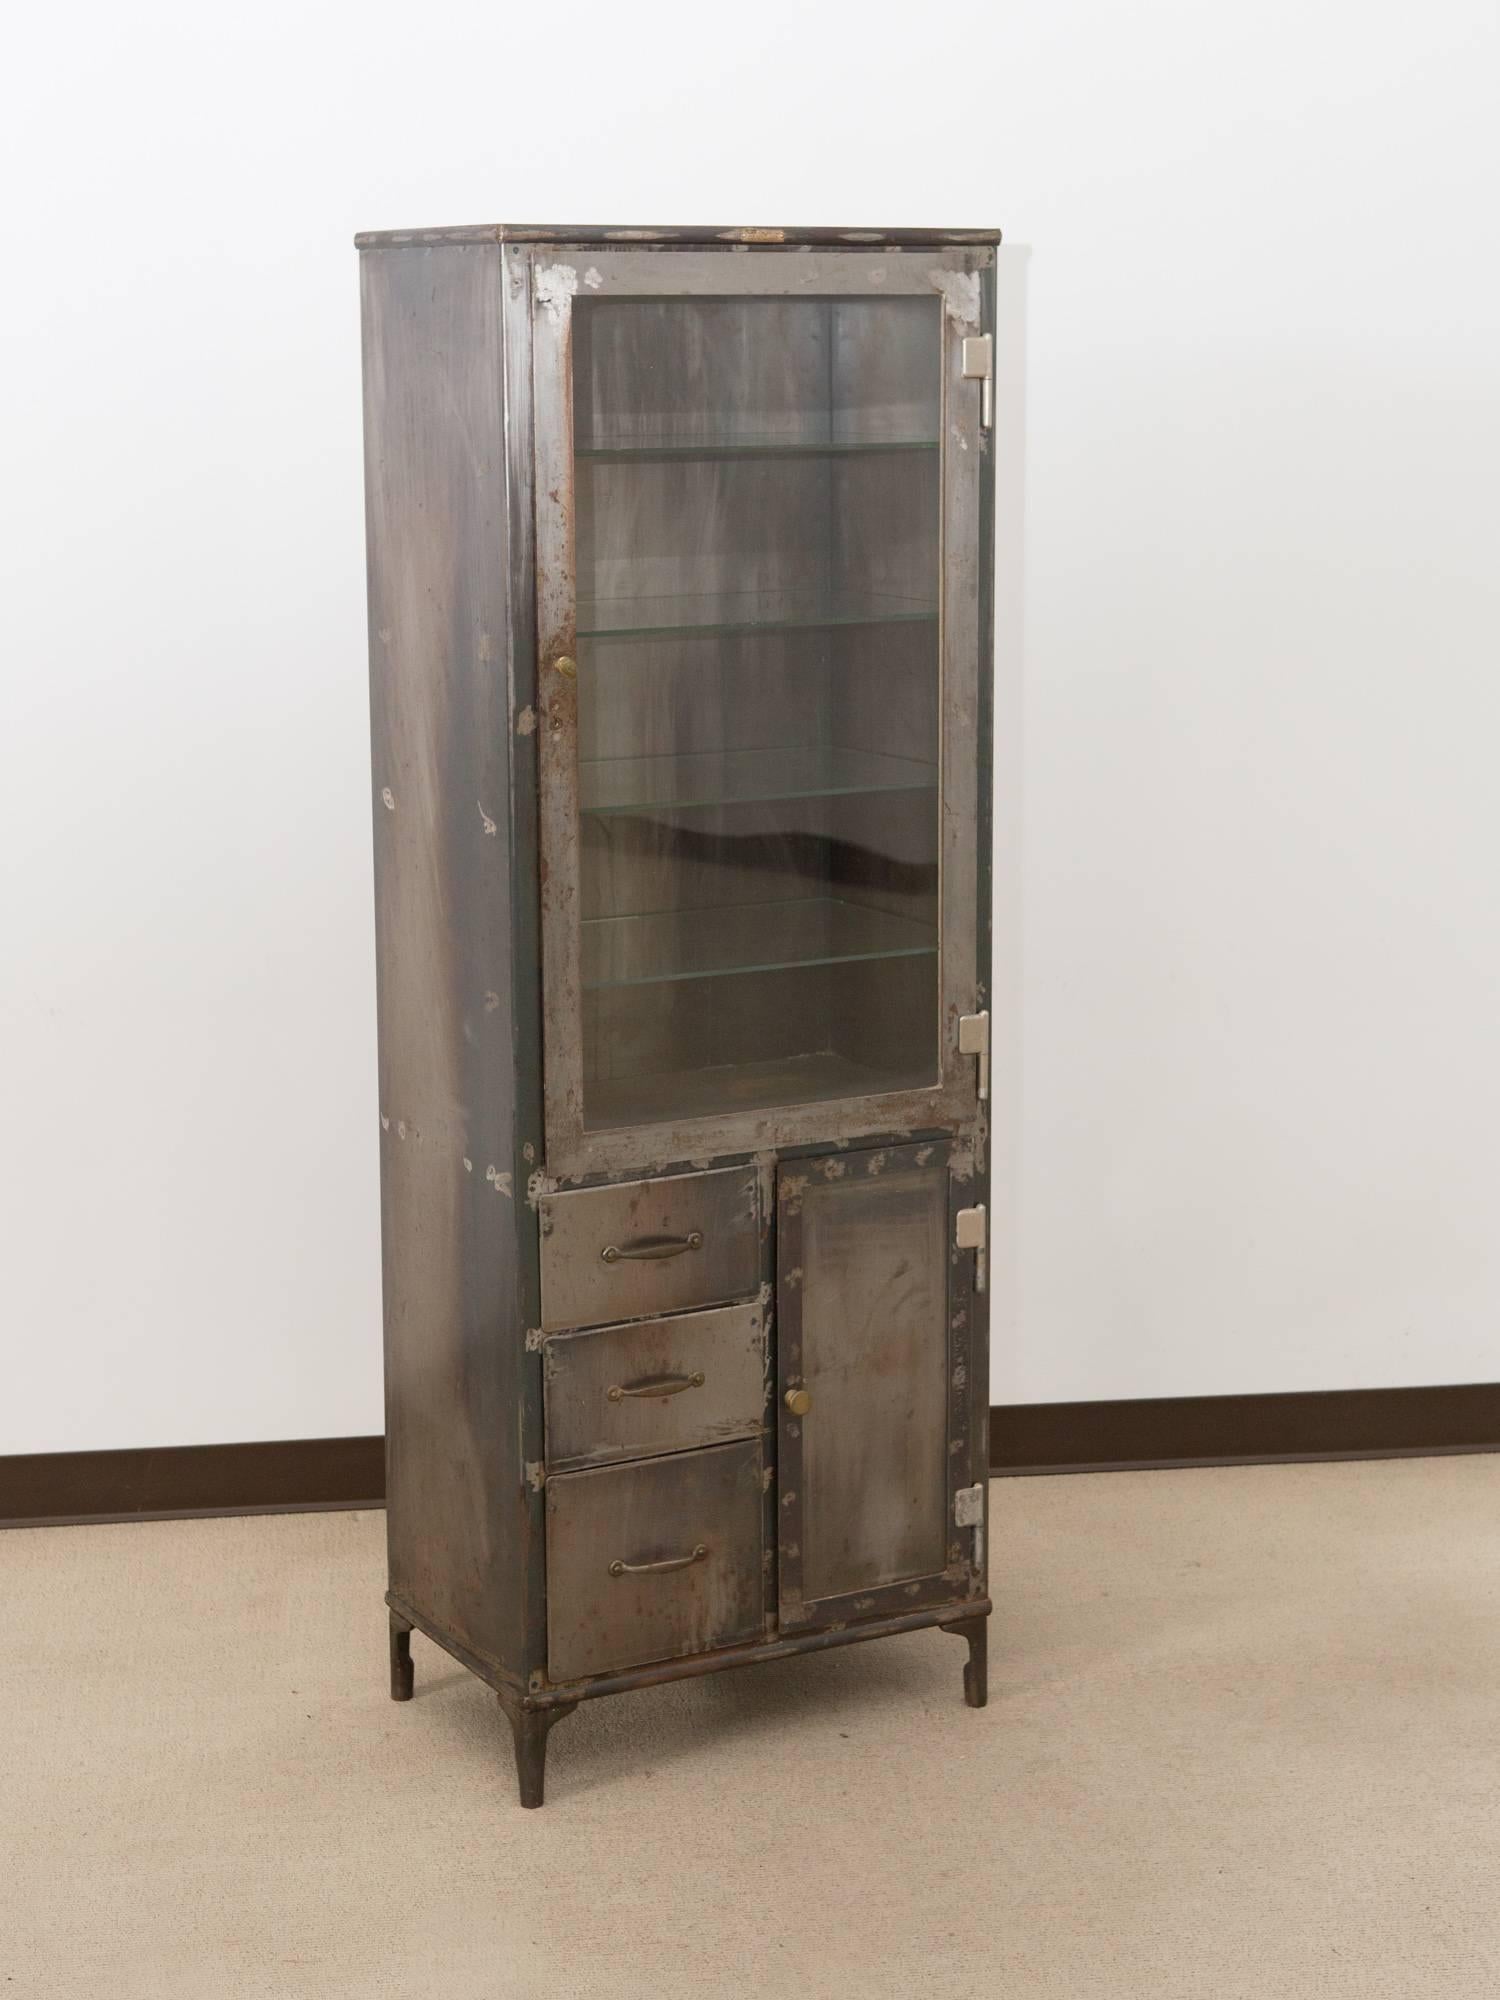 1940s U.S. Metal Medical Cabinet with Glass Shelves 1